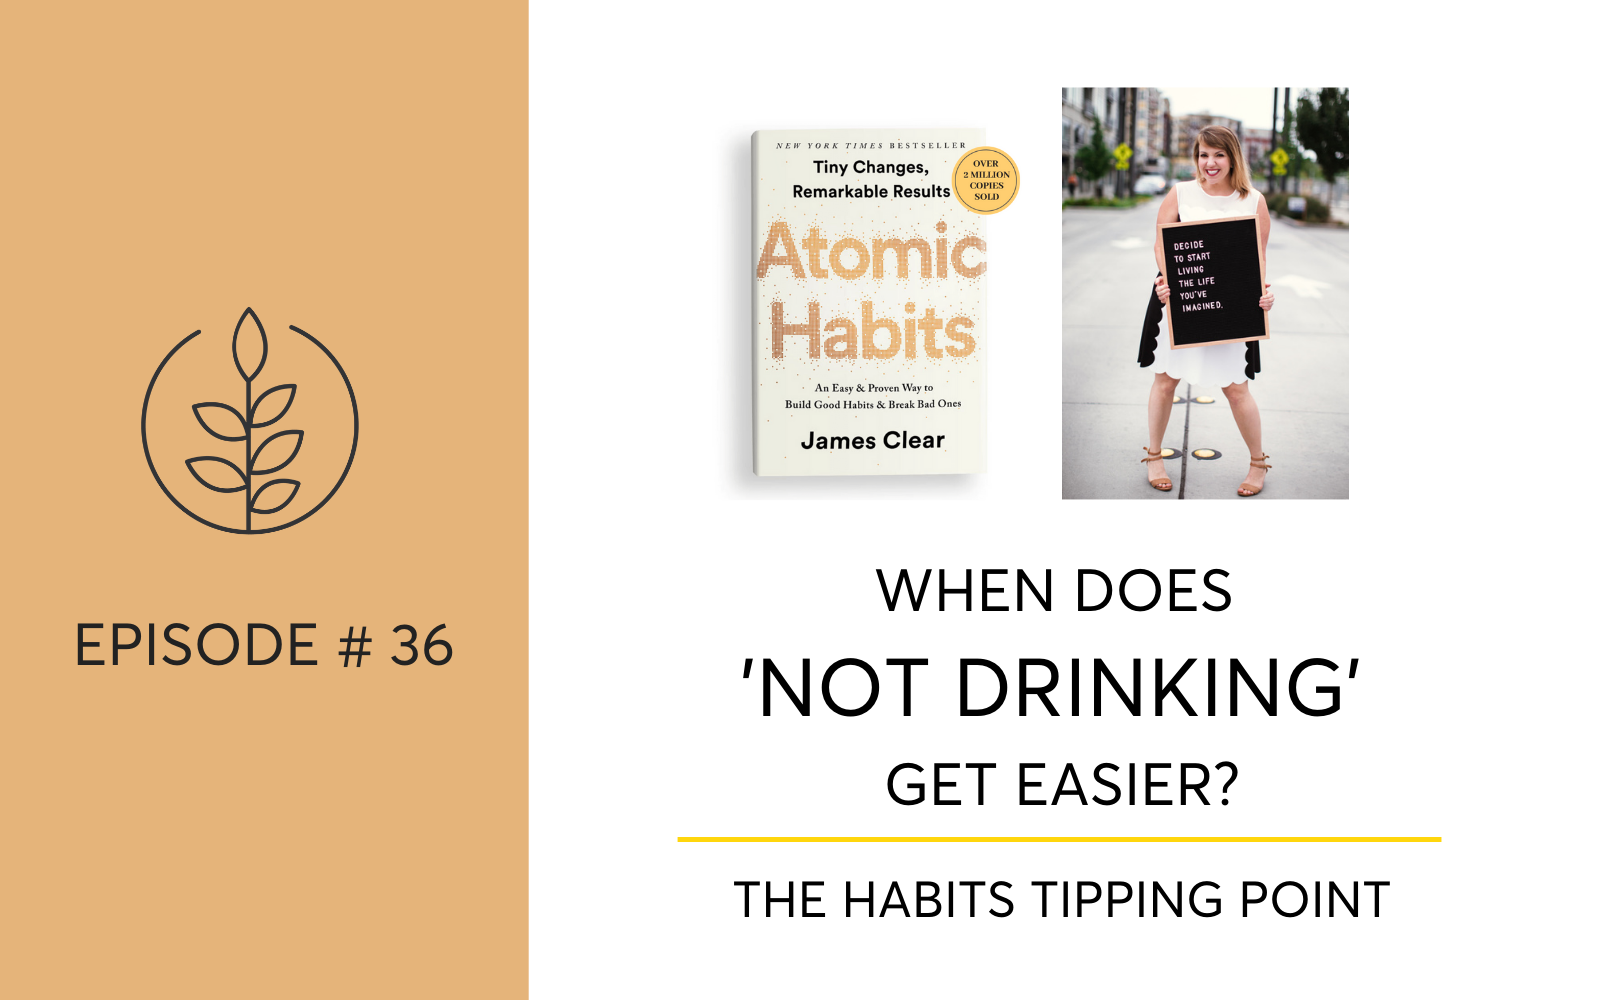 When Does Not Drinking Get Easier? The Atomic Habits Tipping Point